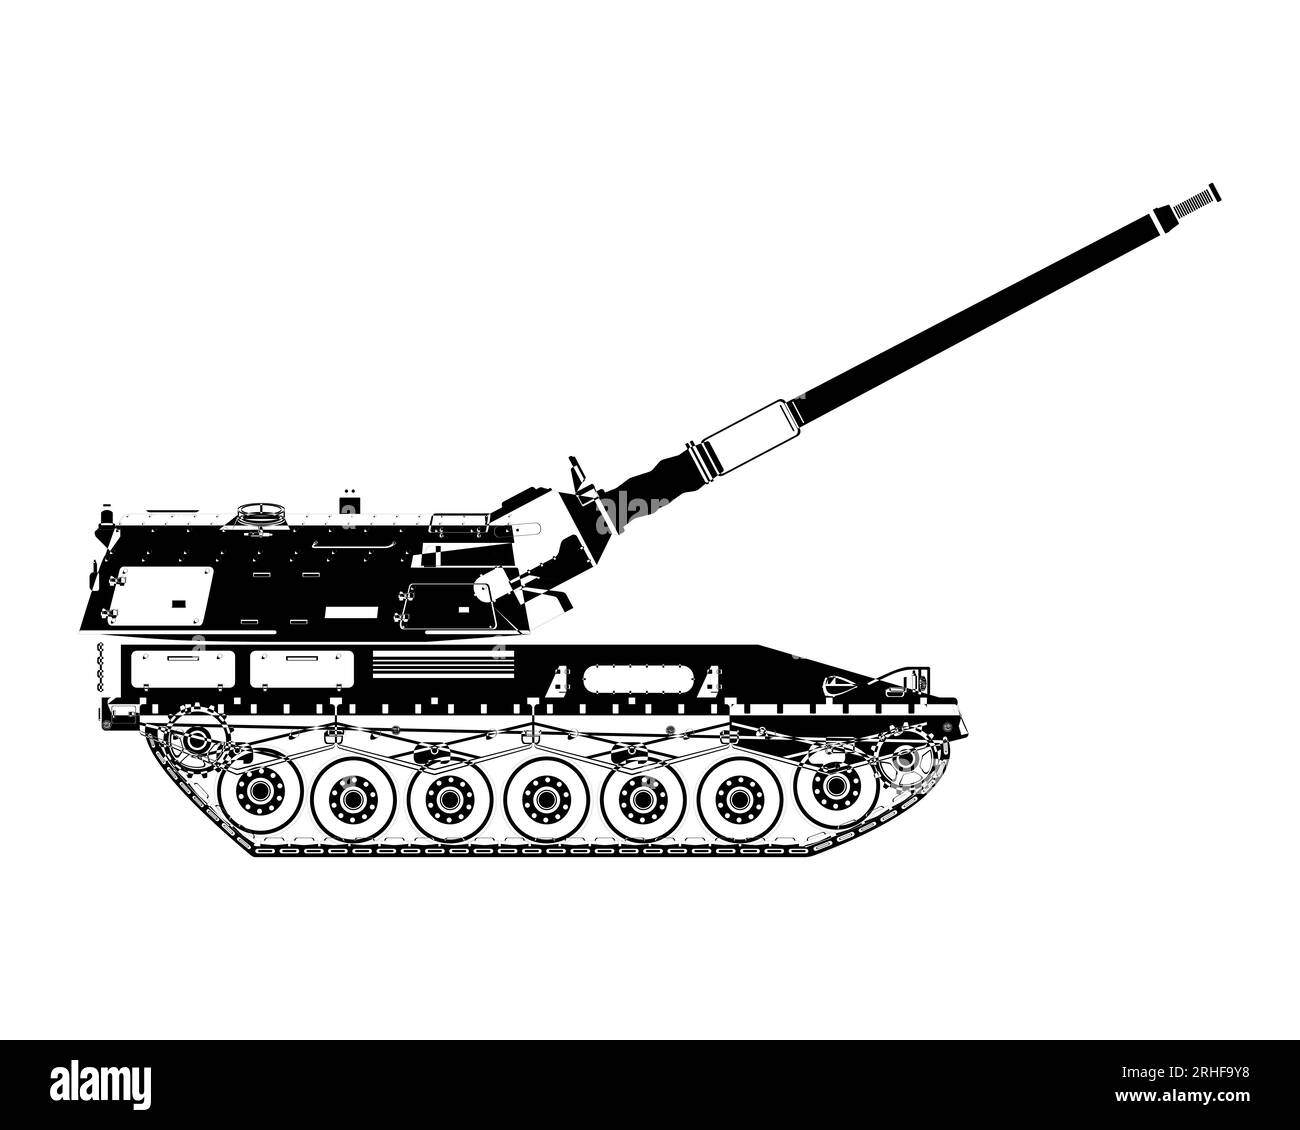 Self-propelled howitzer outline. Raised barrel. Military armored vehicle. Vector illustration isolated on white background. Stock Vector